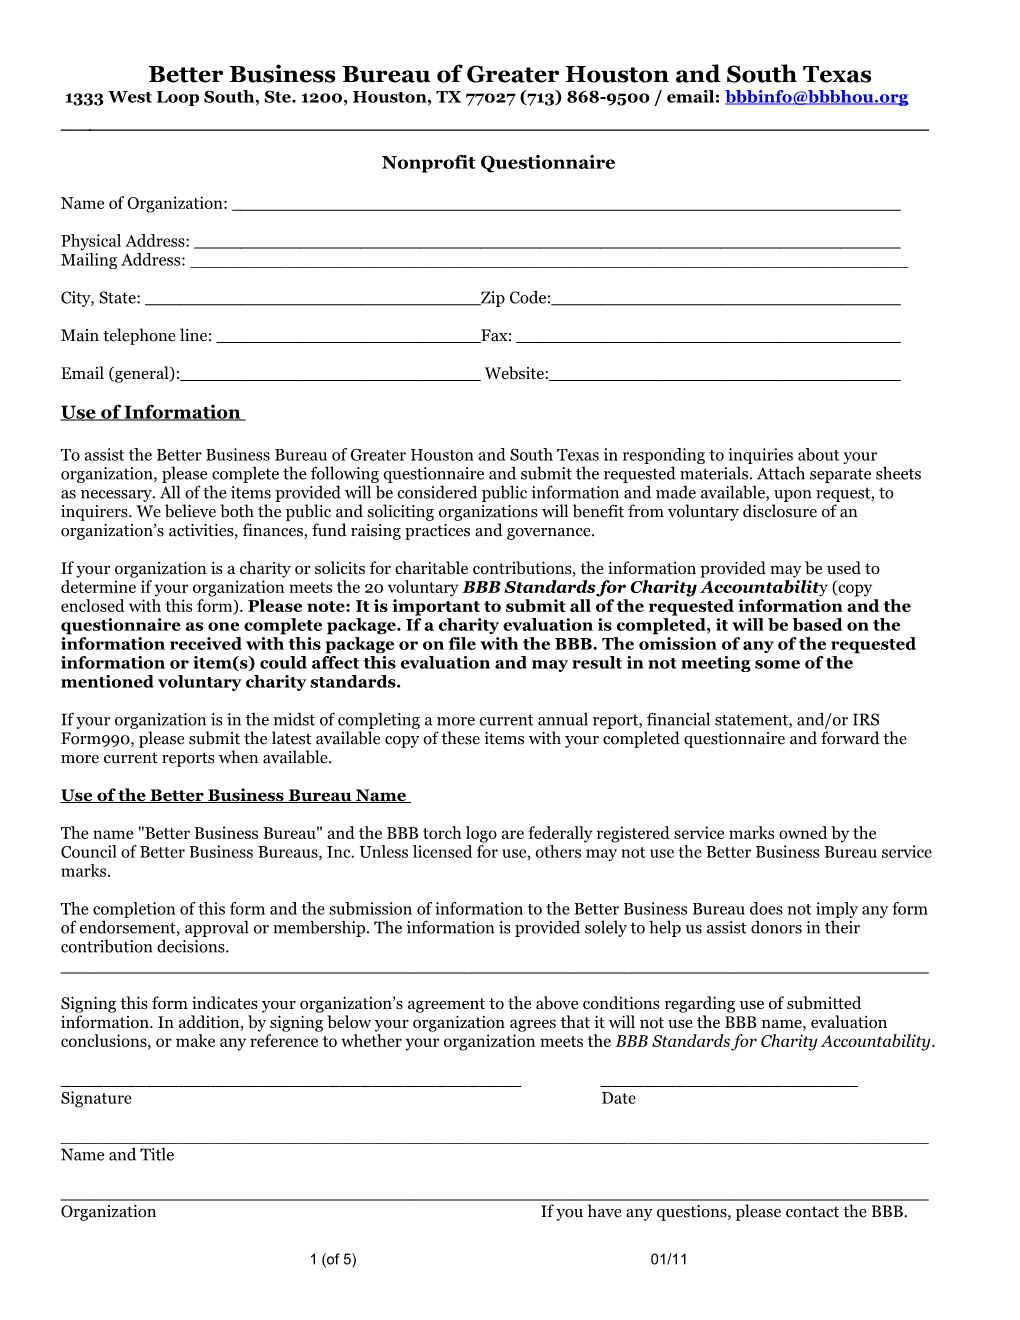 BBB Nonprofit Questionnaire With Front Page